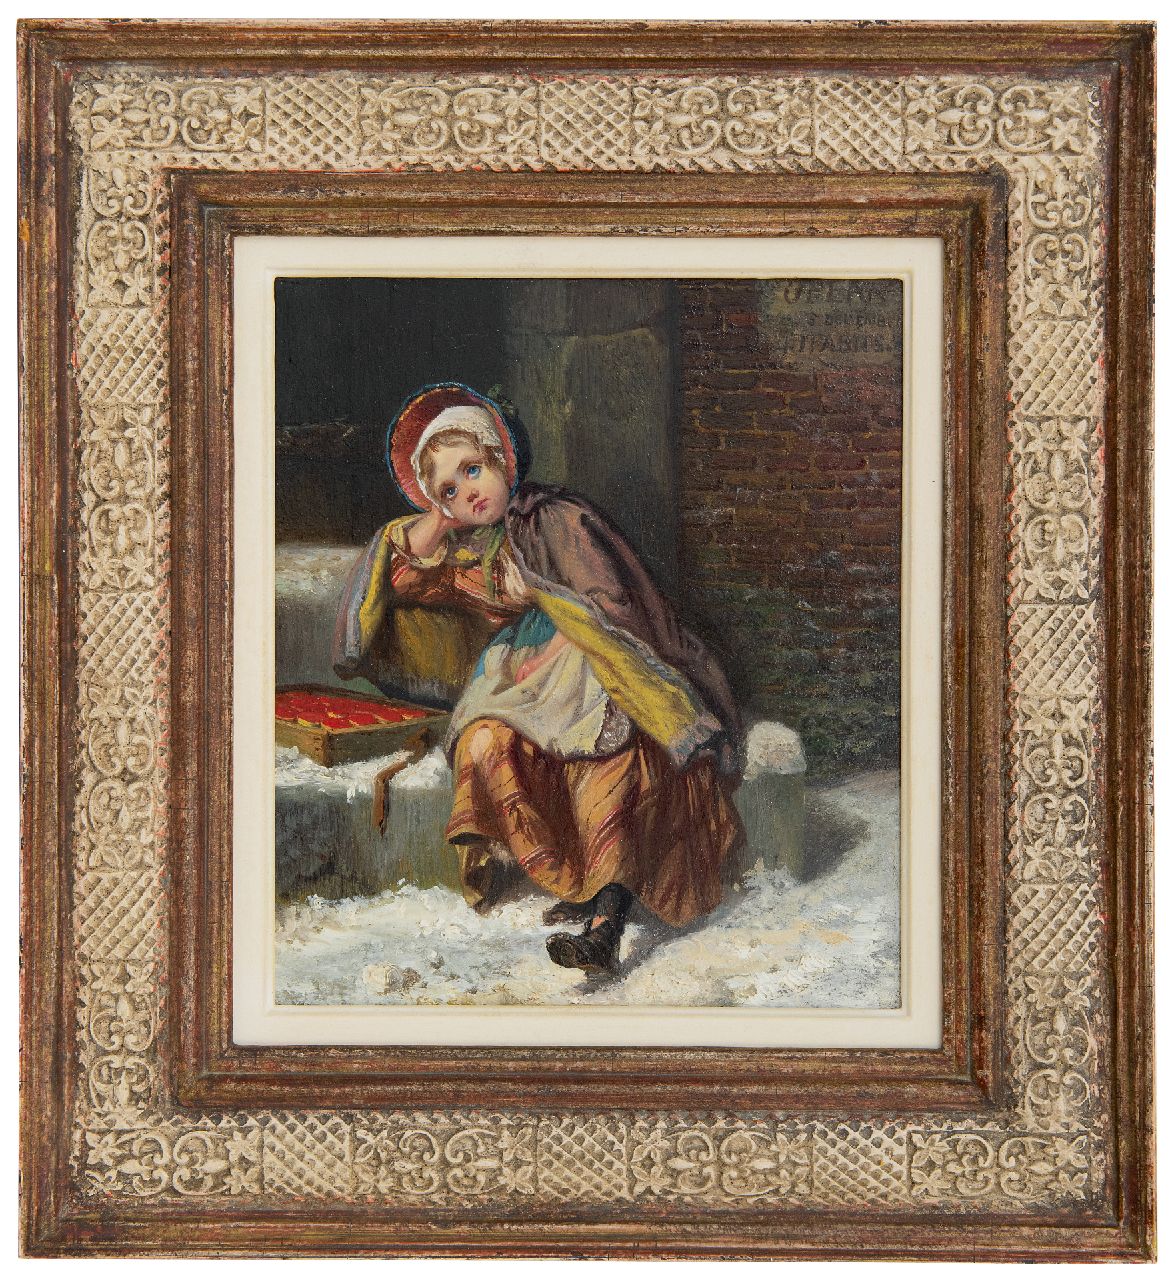 Fabius J.  | Jan Fabius | Paintings offered for sale | A girl selling matches in the snow, oil on panel 21.7 x 18.9 cm, signed u.r.